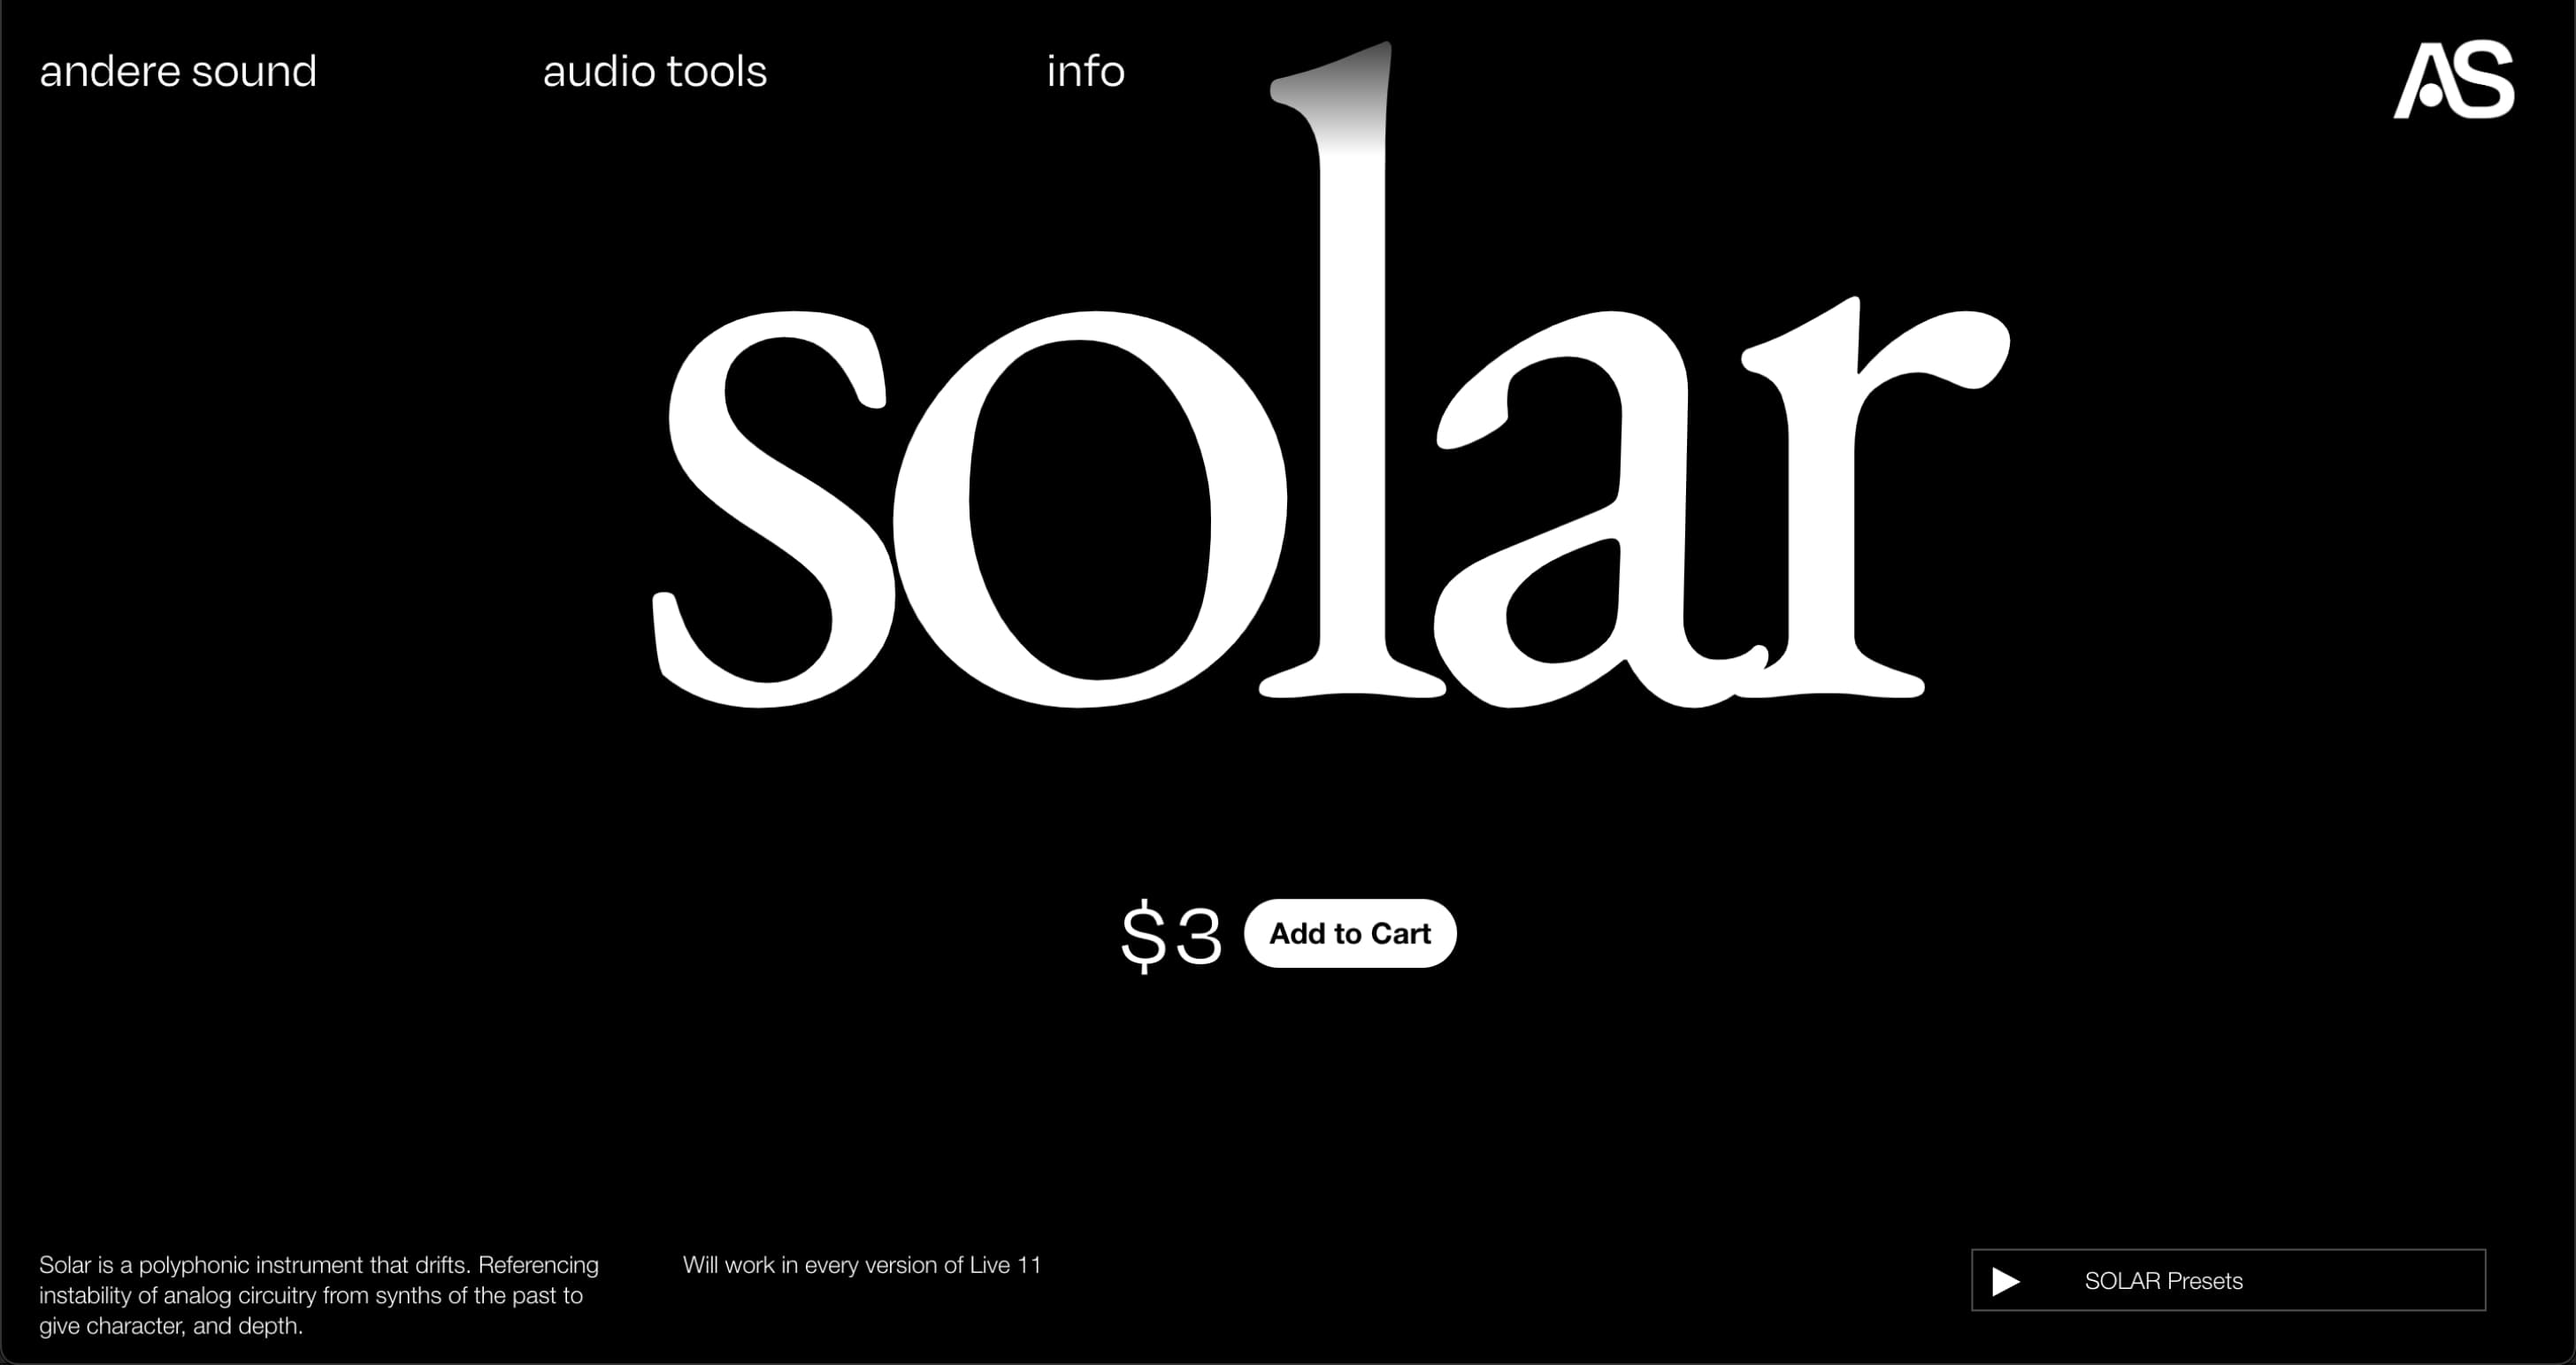 Andere Sound Solar Project Page